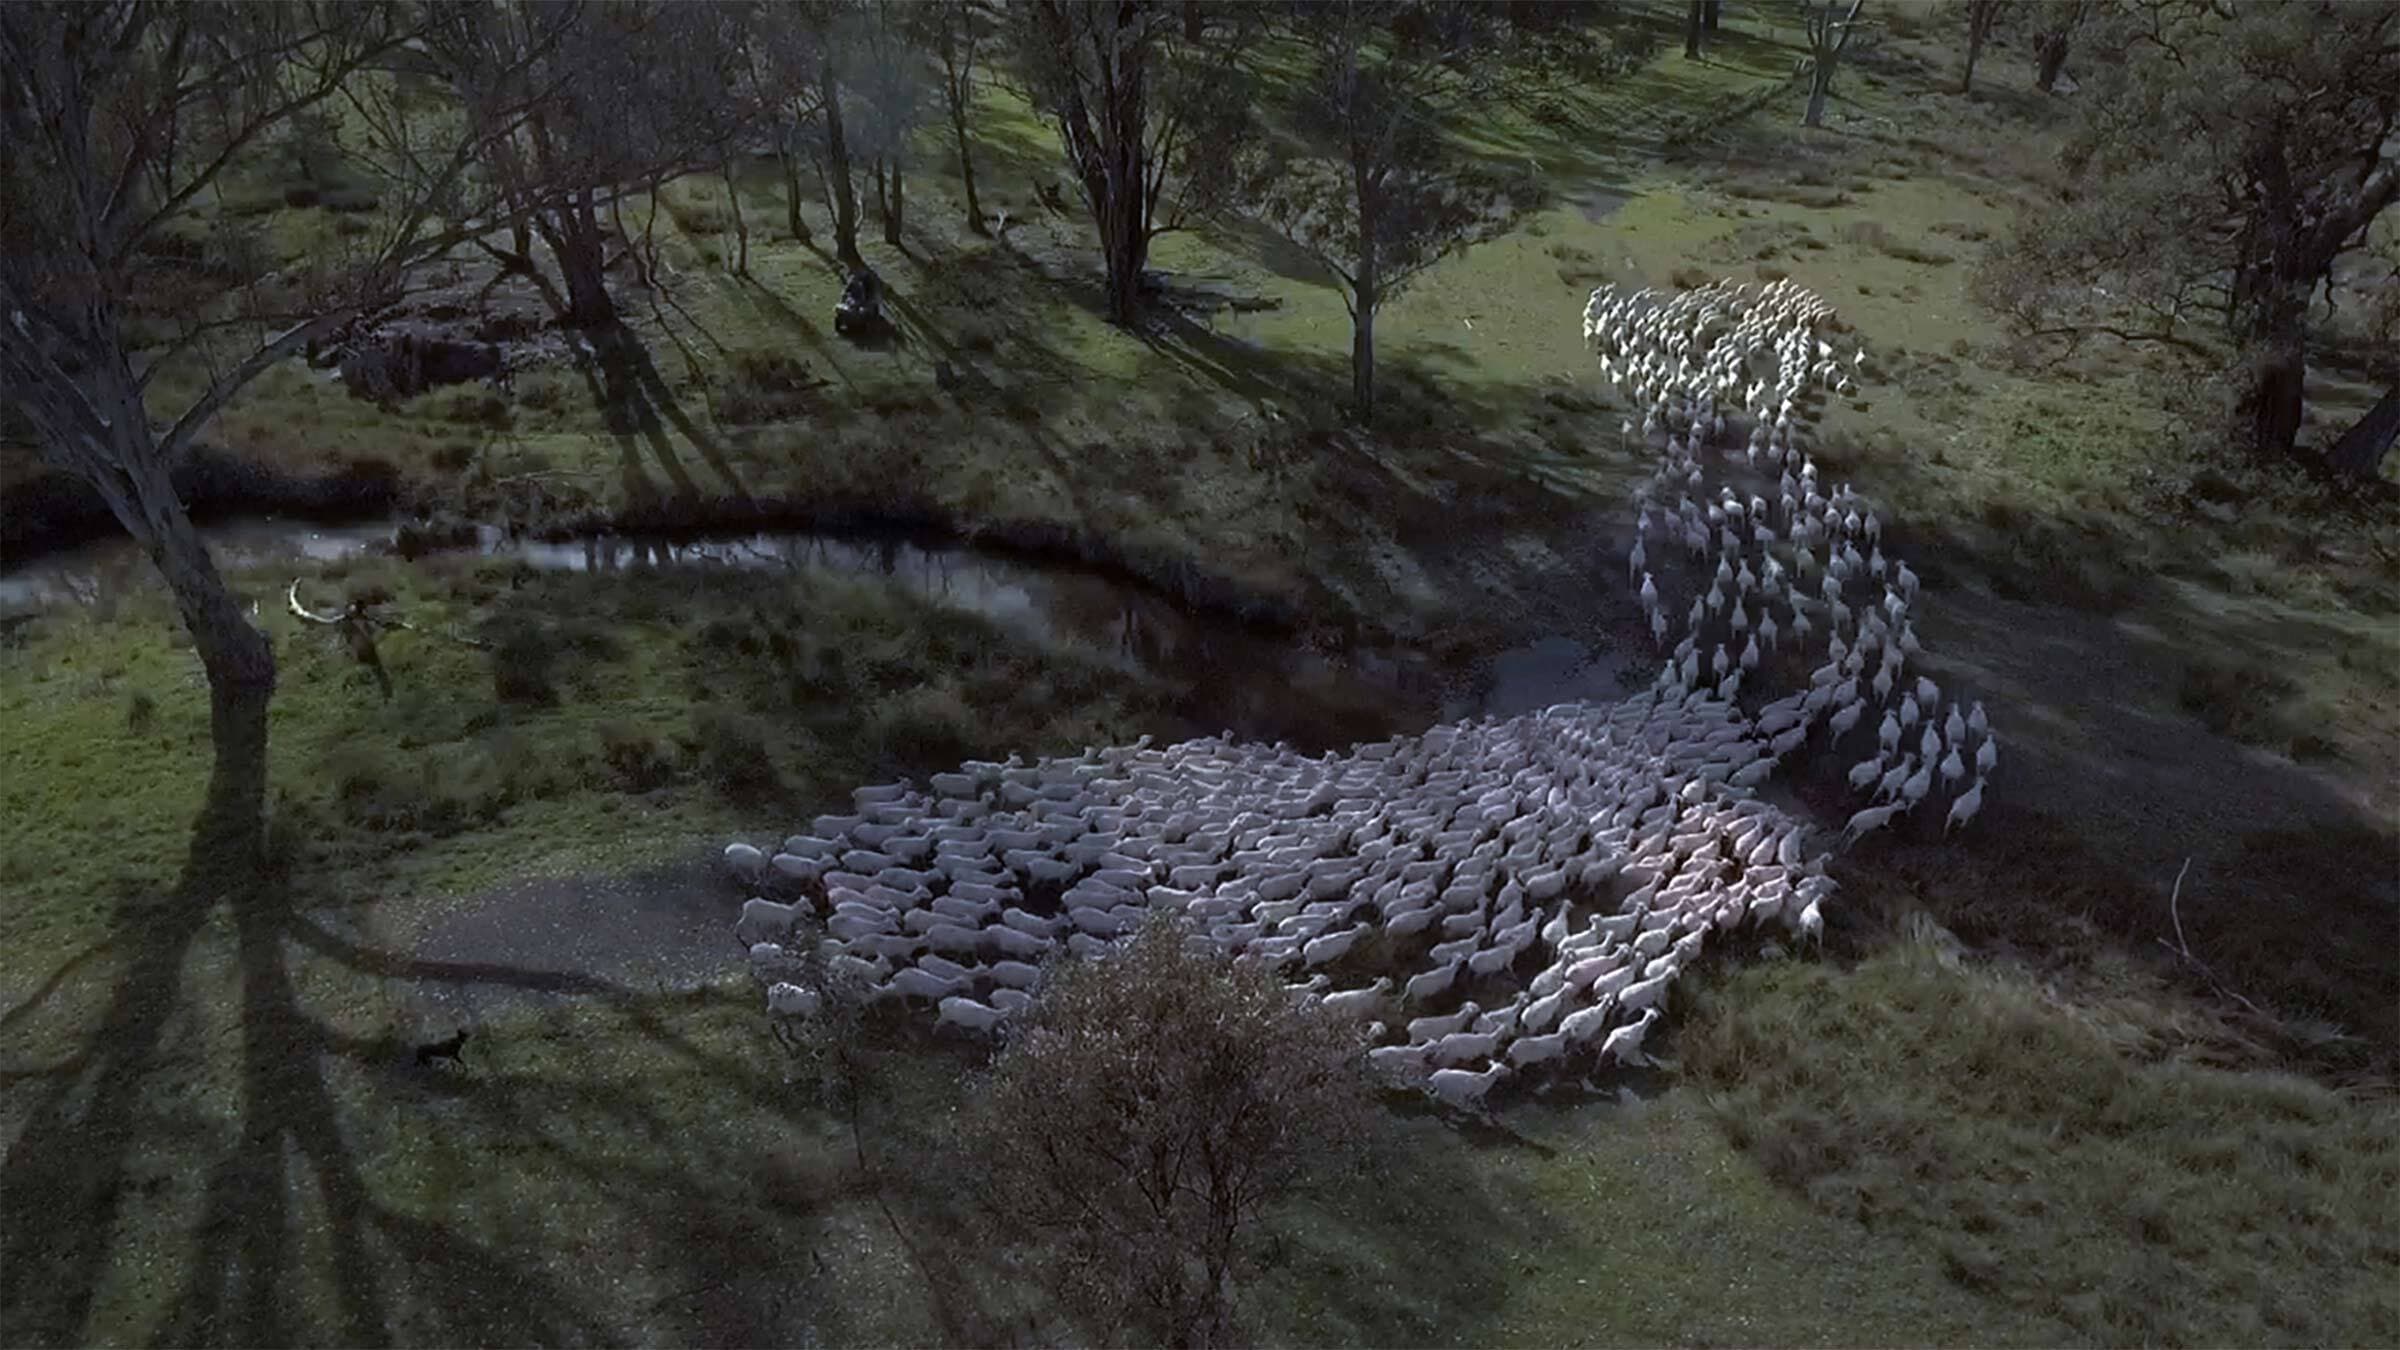 A birds-eye view of sheep crossing a river.